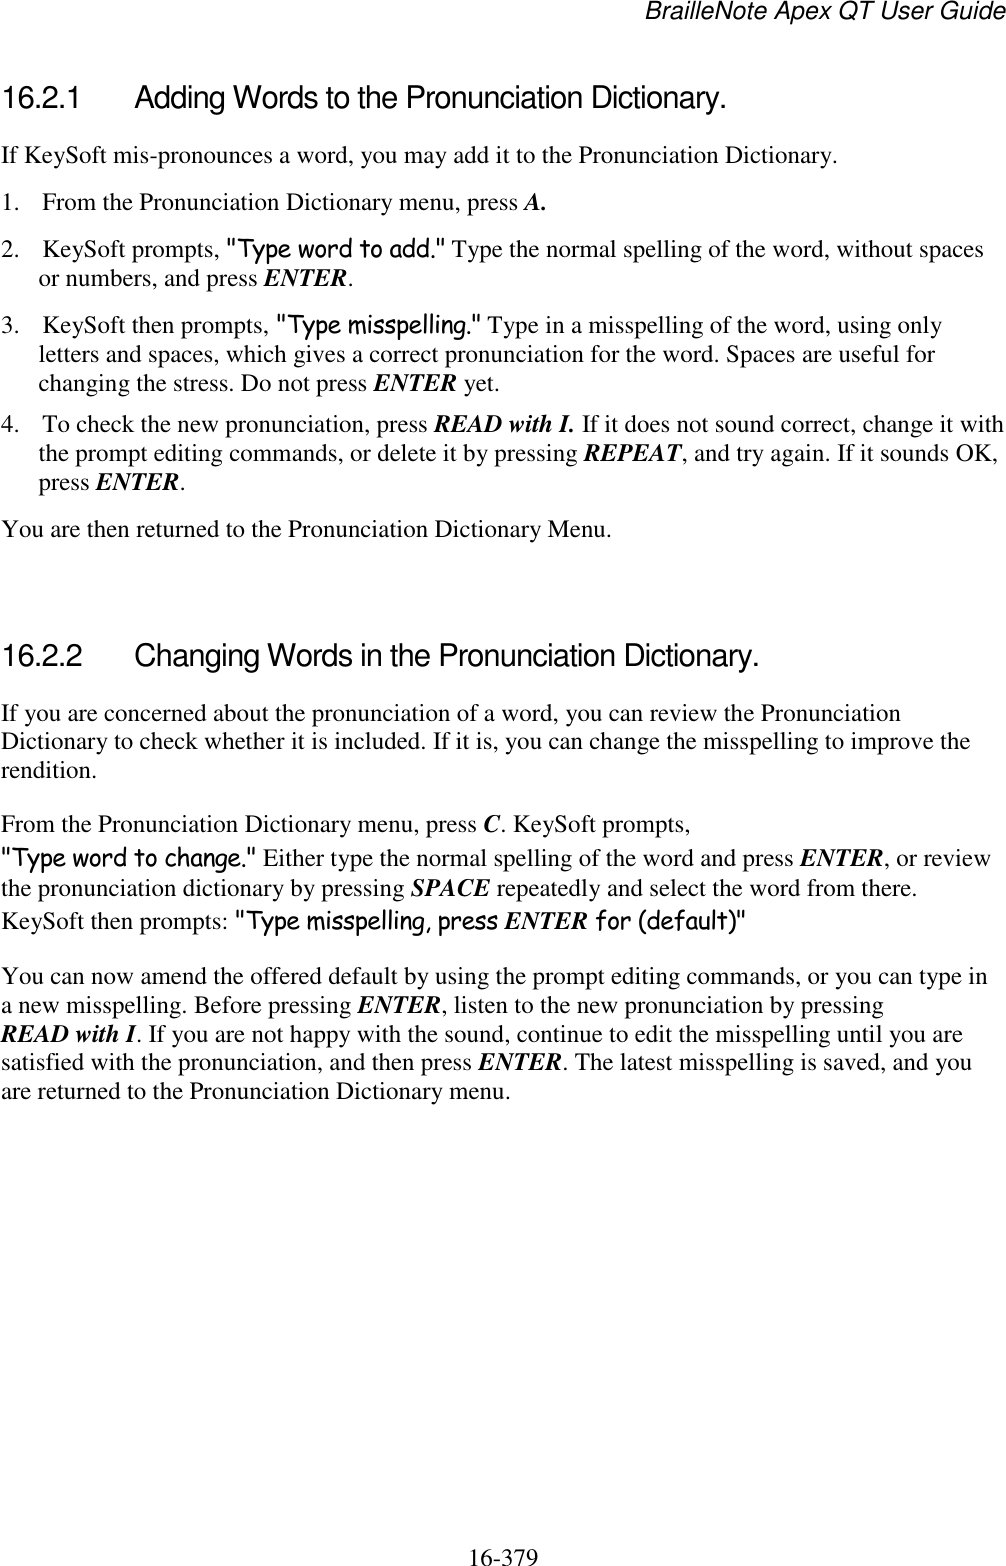 BrailleNote Apex QT User Guide  16-379   16.2.1  Adding Words to the Pronunciation Dictionary. If KeySoft mis-pronounces a word, you may add it to the Pronunciation Dictionary.  1. From the Pronunciation Dictionary menu, press A. 2. KeySoft prompts, &quot;Type word to add.&quot; Type the normal spelling of the word, without spaces or numbers, and press ENTER. 3. KeySoft then prompts, &quot;Type misspelling.&quot; Type in a misspelling of the word, using only letters and spaces, which gives a correct pronunciation for the word. Spaces are useful for changing the stress. Do not press ENTER yet.  4. To check the new pronunciation, press READ with I. If it does not sound correct, change it with the prompt editing commands, or delete it by pressing REPEAT, and try again. If it sounds OK, press ENTER.  You are then returned to the Pronunciation Dictionary Menu.   16.2.2  Changing Words in the Pronunciation Dictionary. If you are concerned about the pronunciation of a word, you can review the Pronunciation Dictionary to check whether it is included. If it is, you can change the misspelling to improve the rendition. From the Pronunciation Dictionary menu, press C. KeySoft prompts, &quot;Type word to change.&quot; Either type the normal spelling of the word and press ENTER, or review the pronunciation dictionary by pressing SPACE repeatedly and select the word from there. KeySoft then prompts: &quot;Type misspelling, press ENTER for (default)&quot; You can now amend the offered default by using the prompt editing commands, or you can type in a new misspelling. Before pressing ENTER, listen to the new pronunciation by pressing READ with I. If you are not happy with the sound, continue to edit the misspelling until you are satisfied with the pronunciation, and then press ENTER. The latest misspelling is saved, and you are returned to the Pronunciation Dictionary menu.   